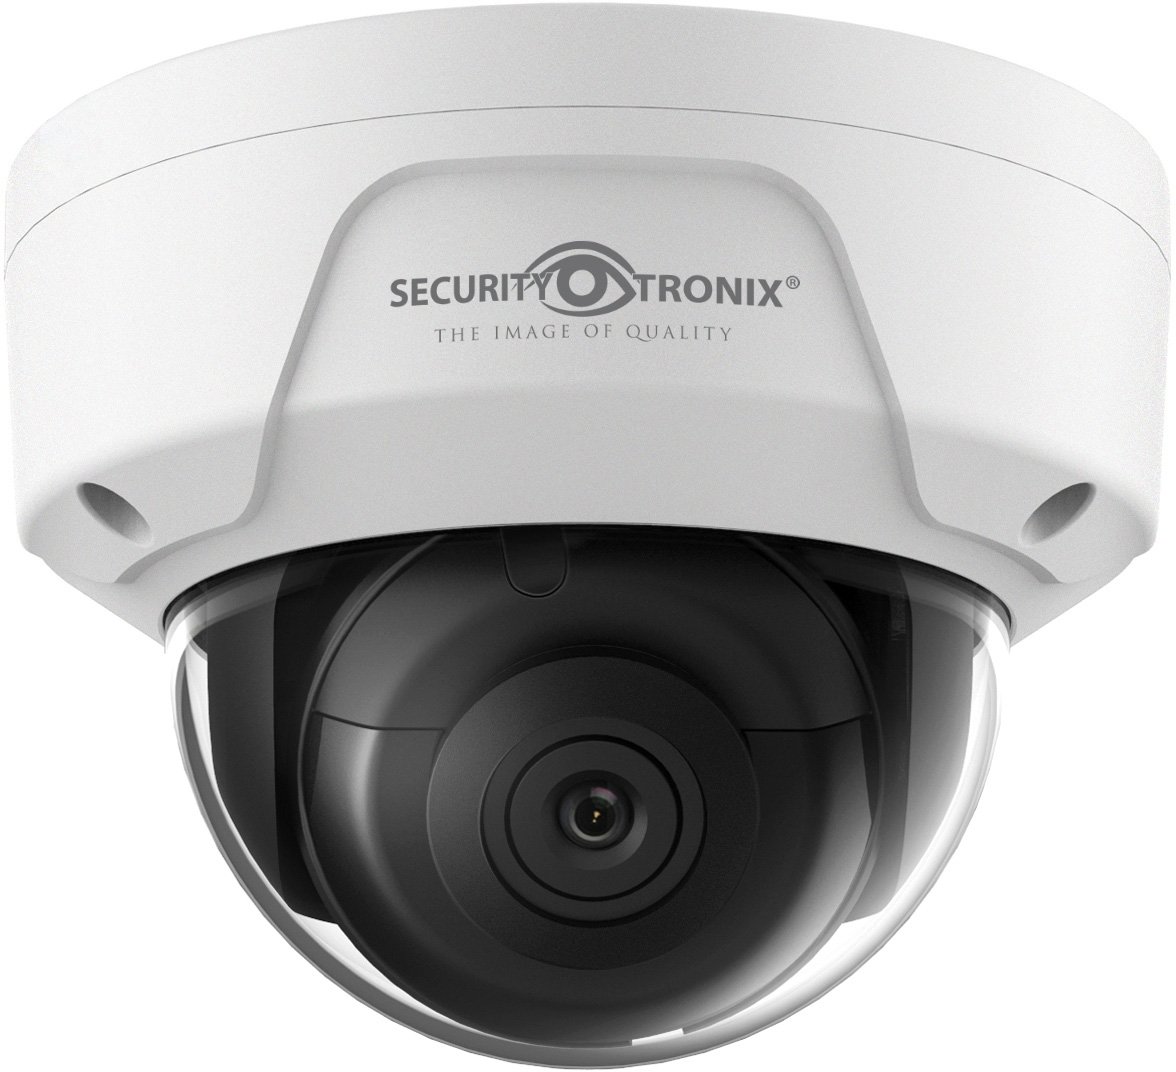 SecurityTronix ST-IP4FD 4MP IP Fixed Lens Dome Camera - White SCT-ST-IP4FD